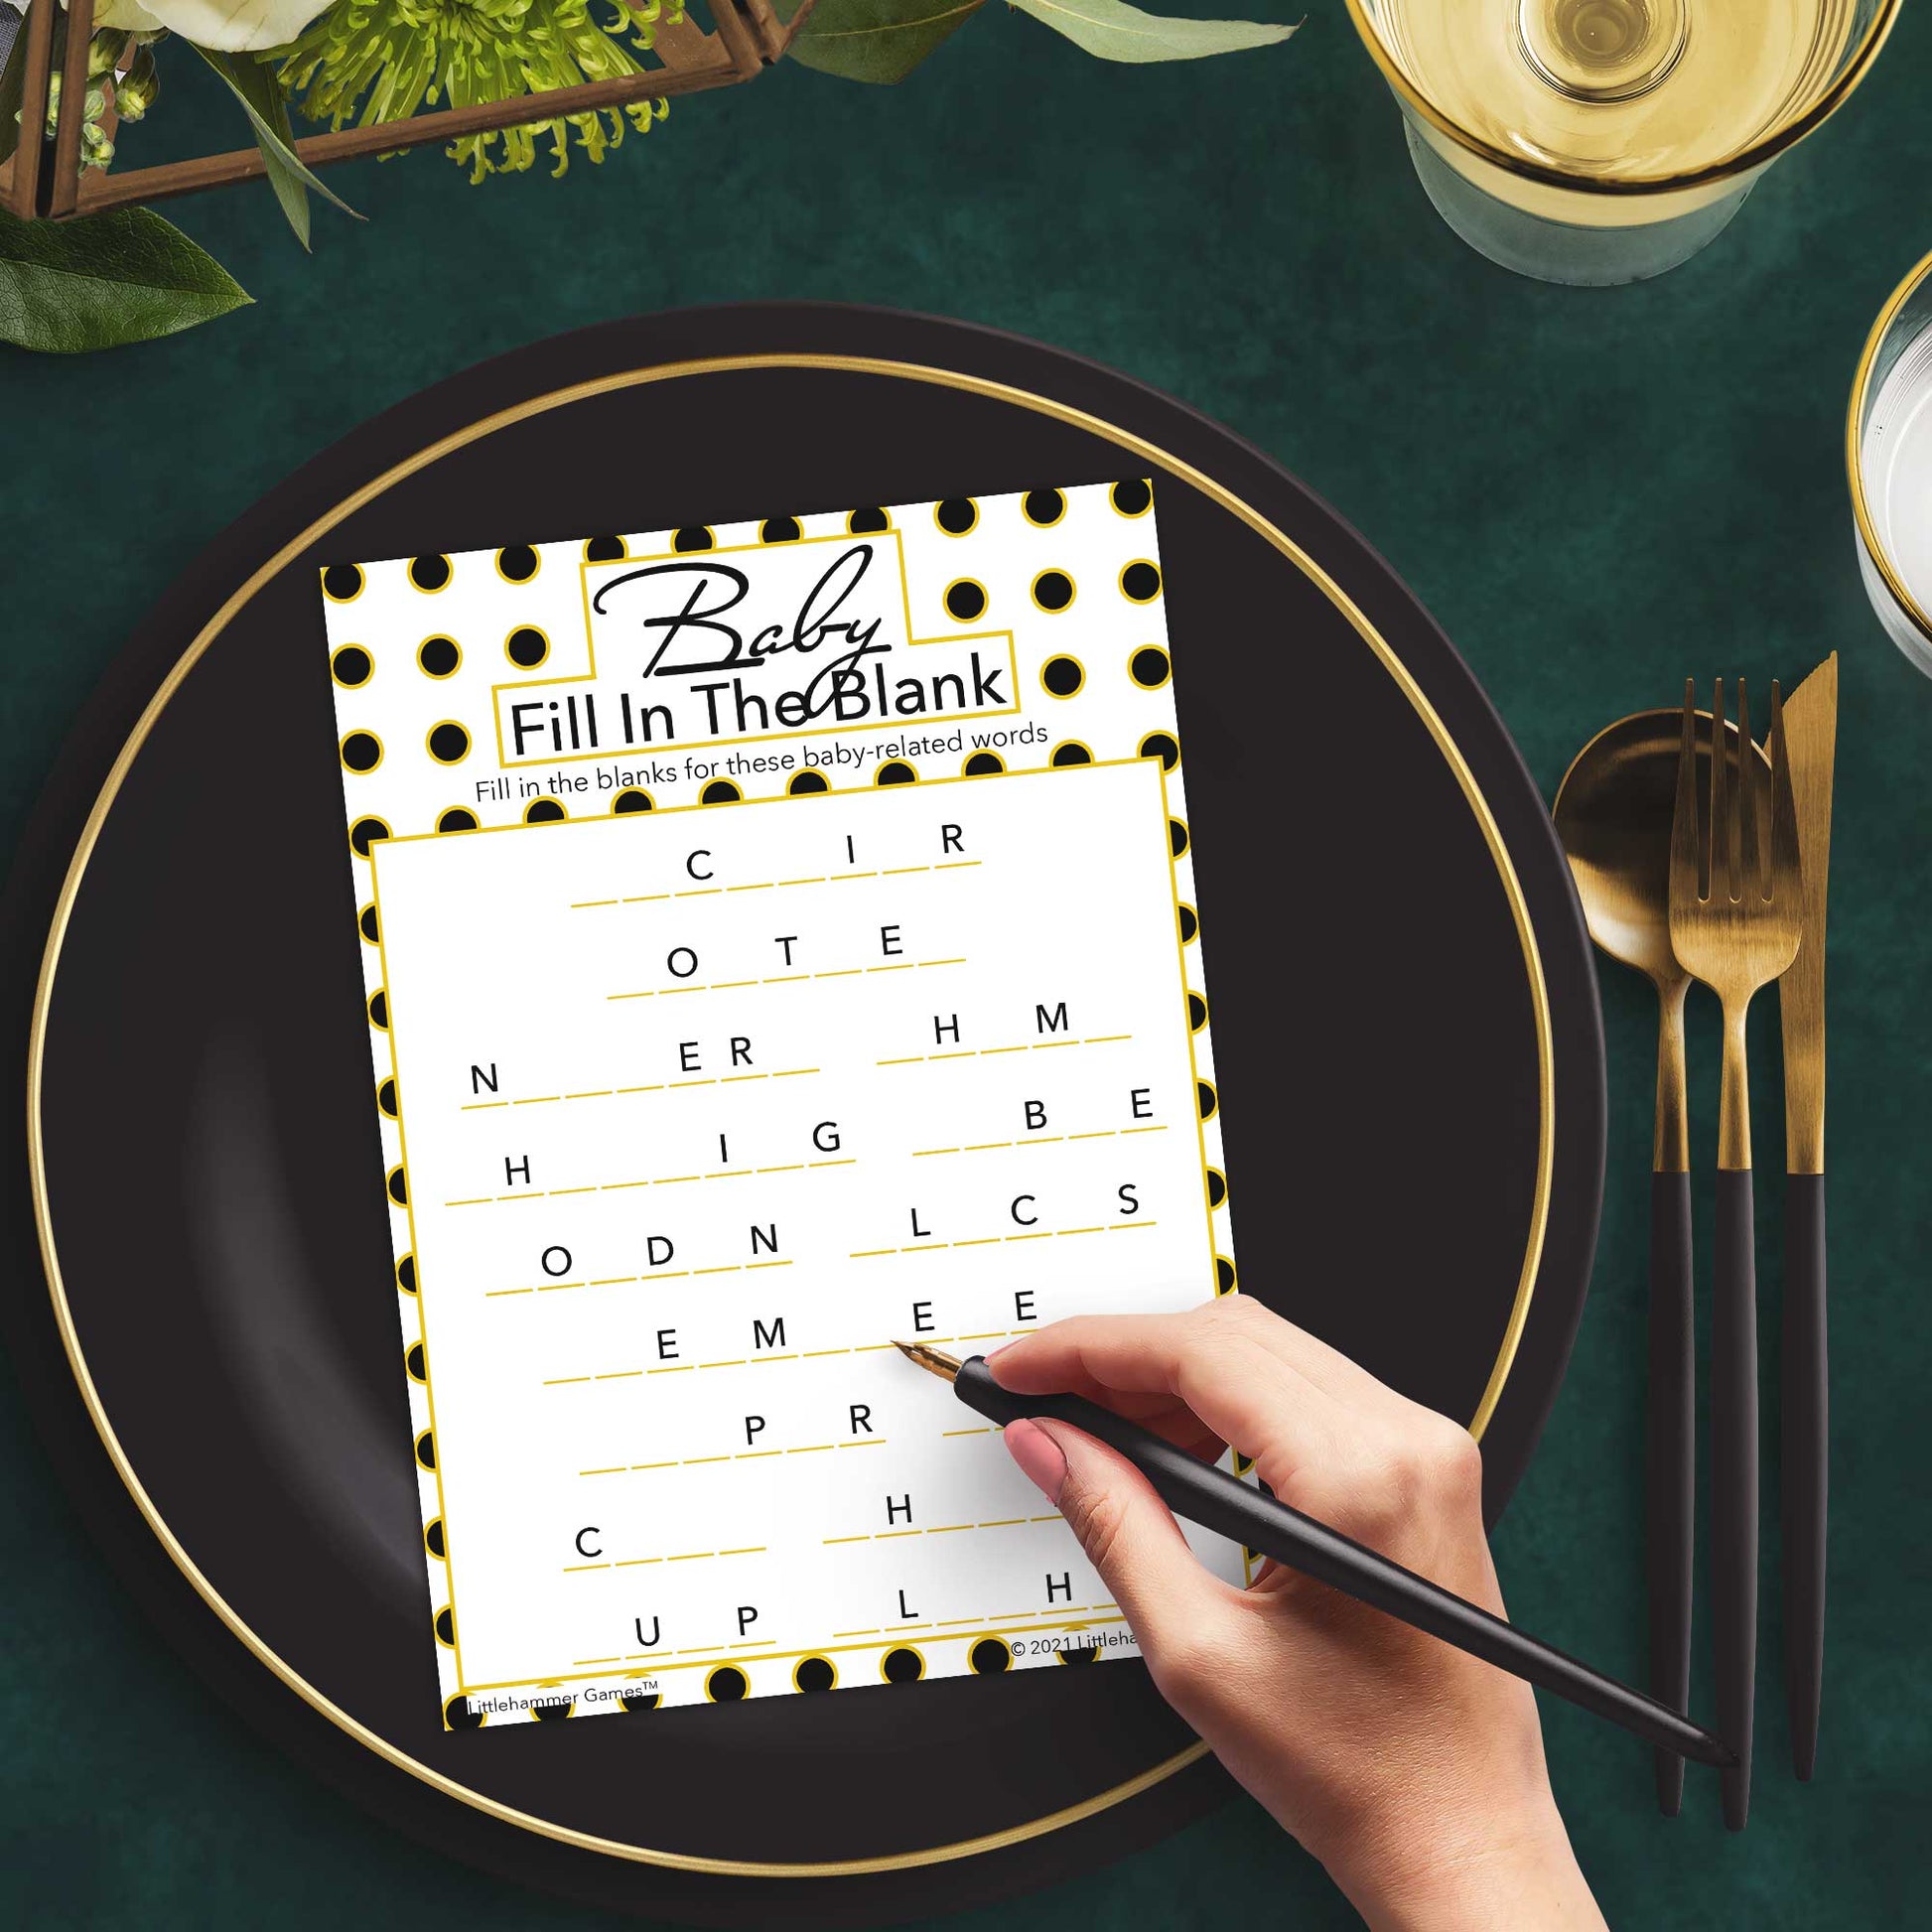 Woman with a pen playing a black and gold polka dot Baby Fill in the Blank game card at a dark place setting